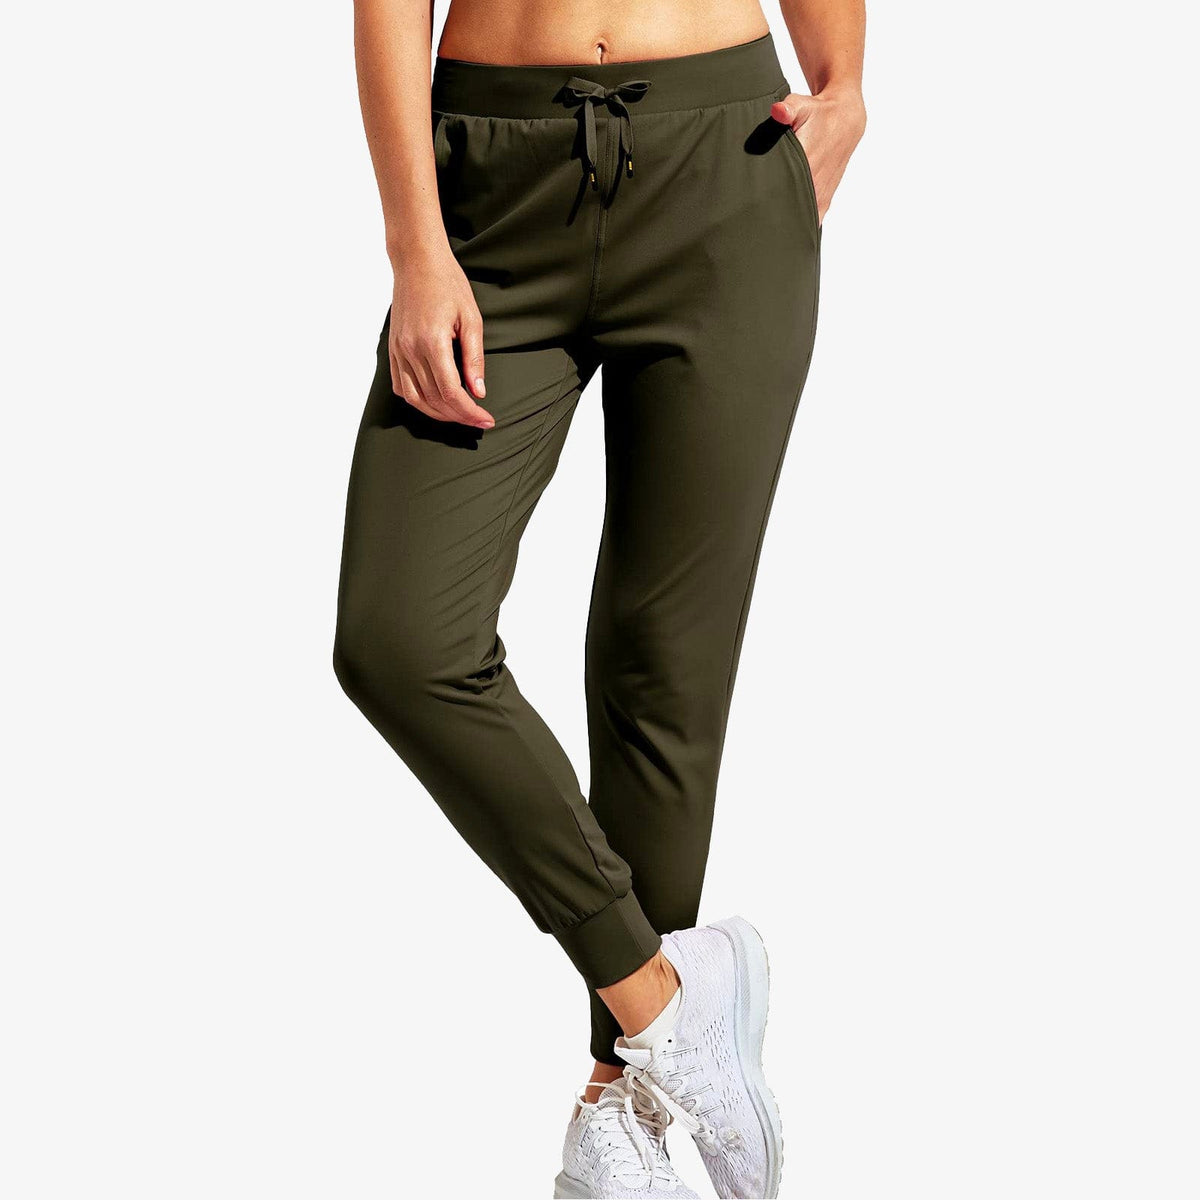 Reduced RQYYD Women's Sweatpants with Pocket, Women Active